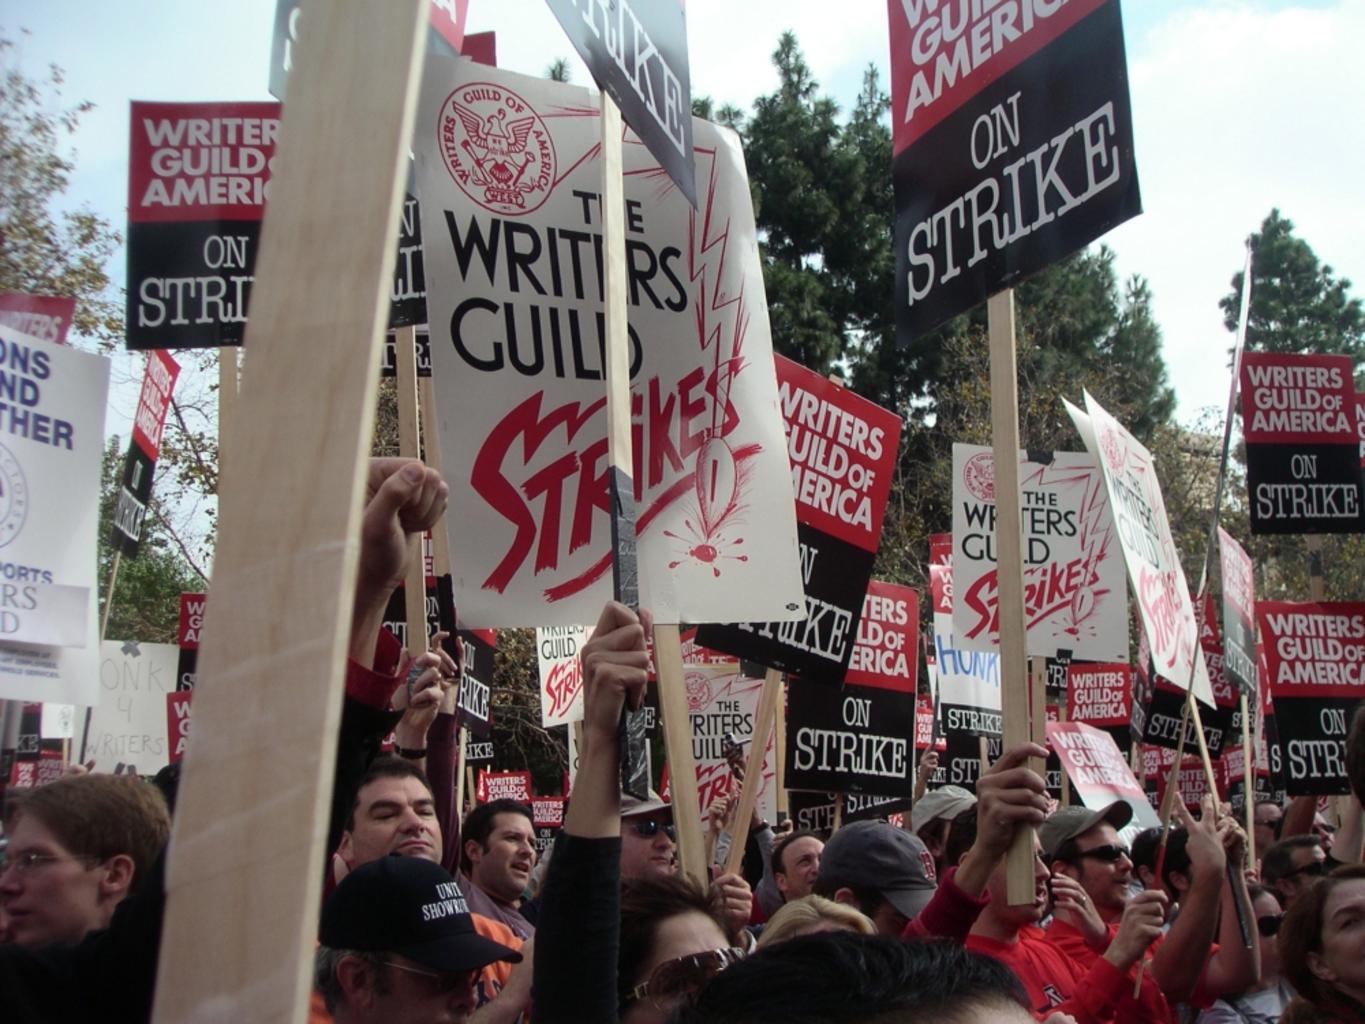 The Writers Guild on strike